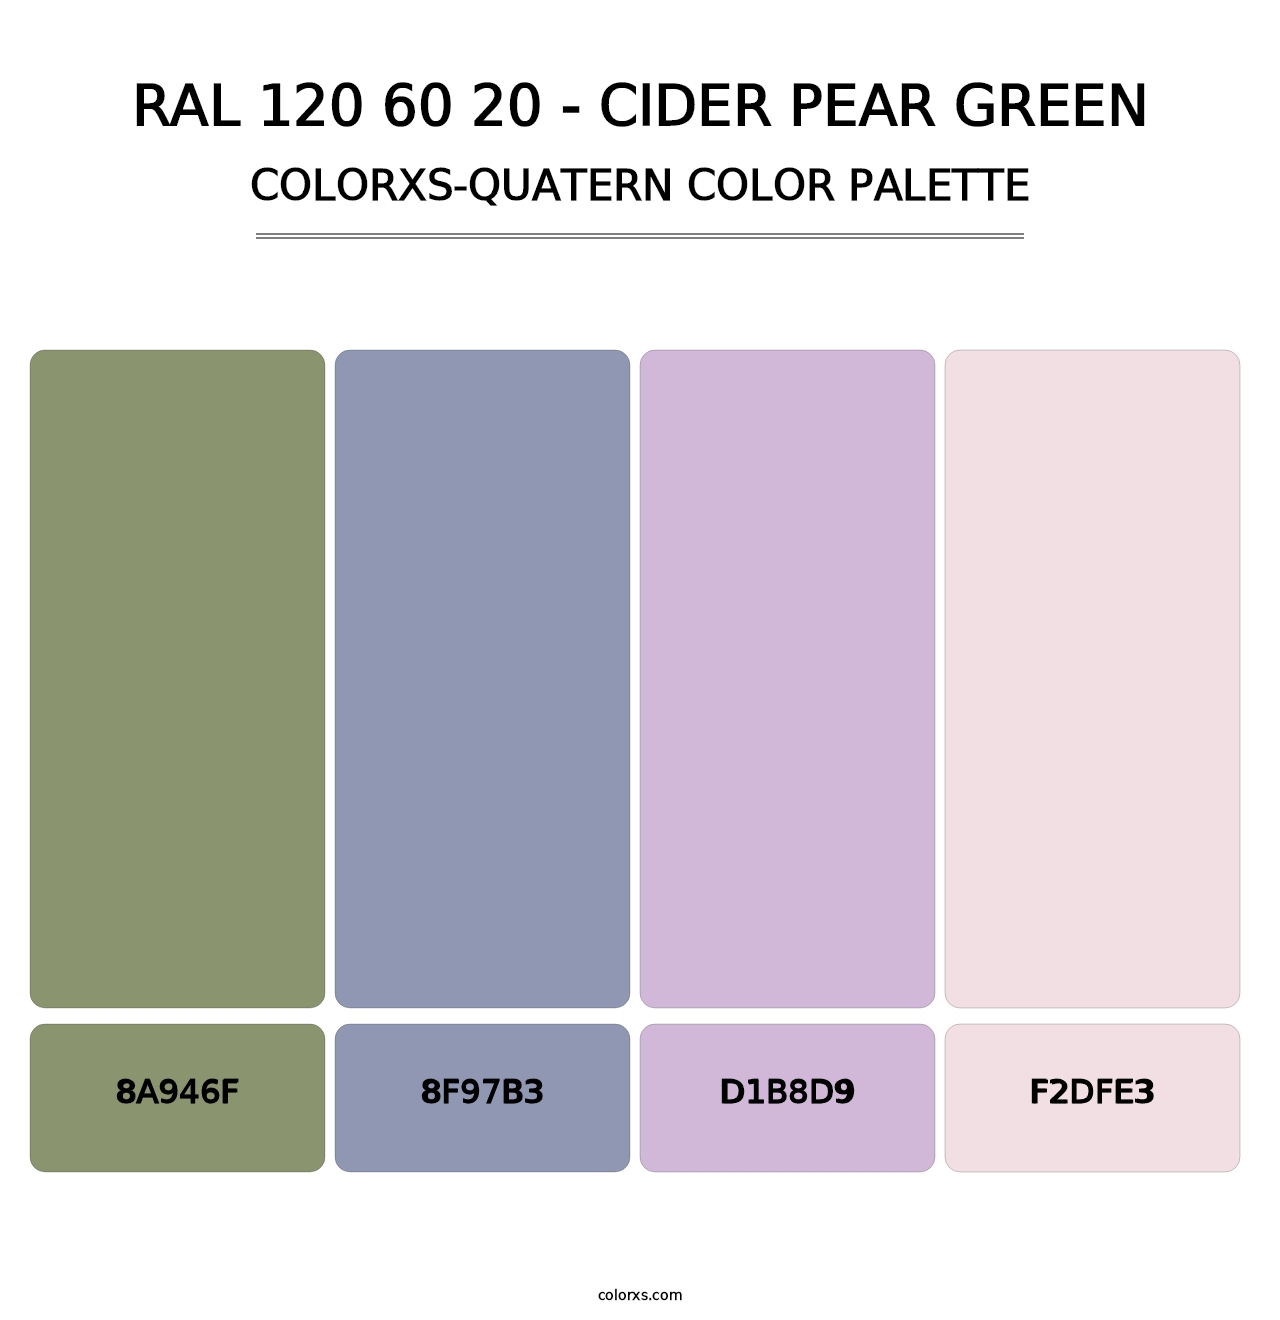 RAL 120 60 20 - Cider Pear Green - Colorxs Quatern Palette